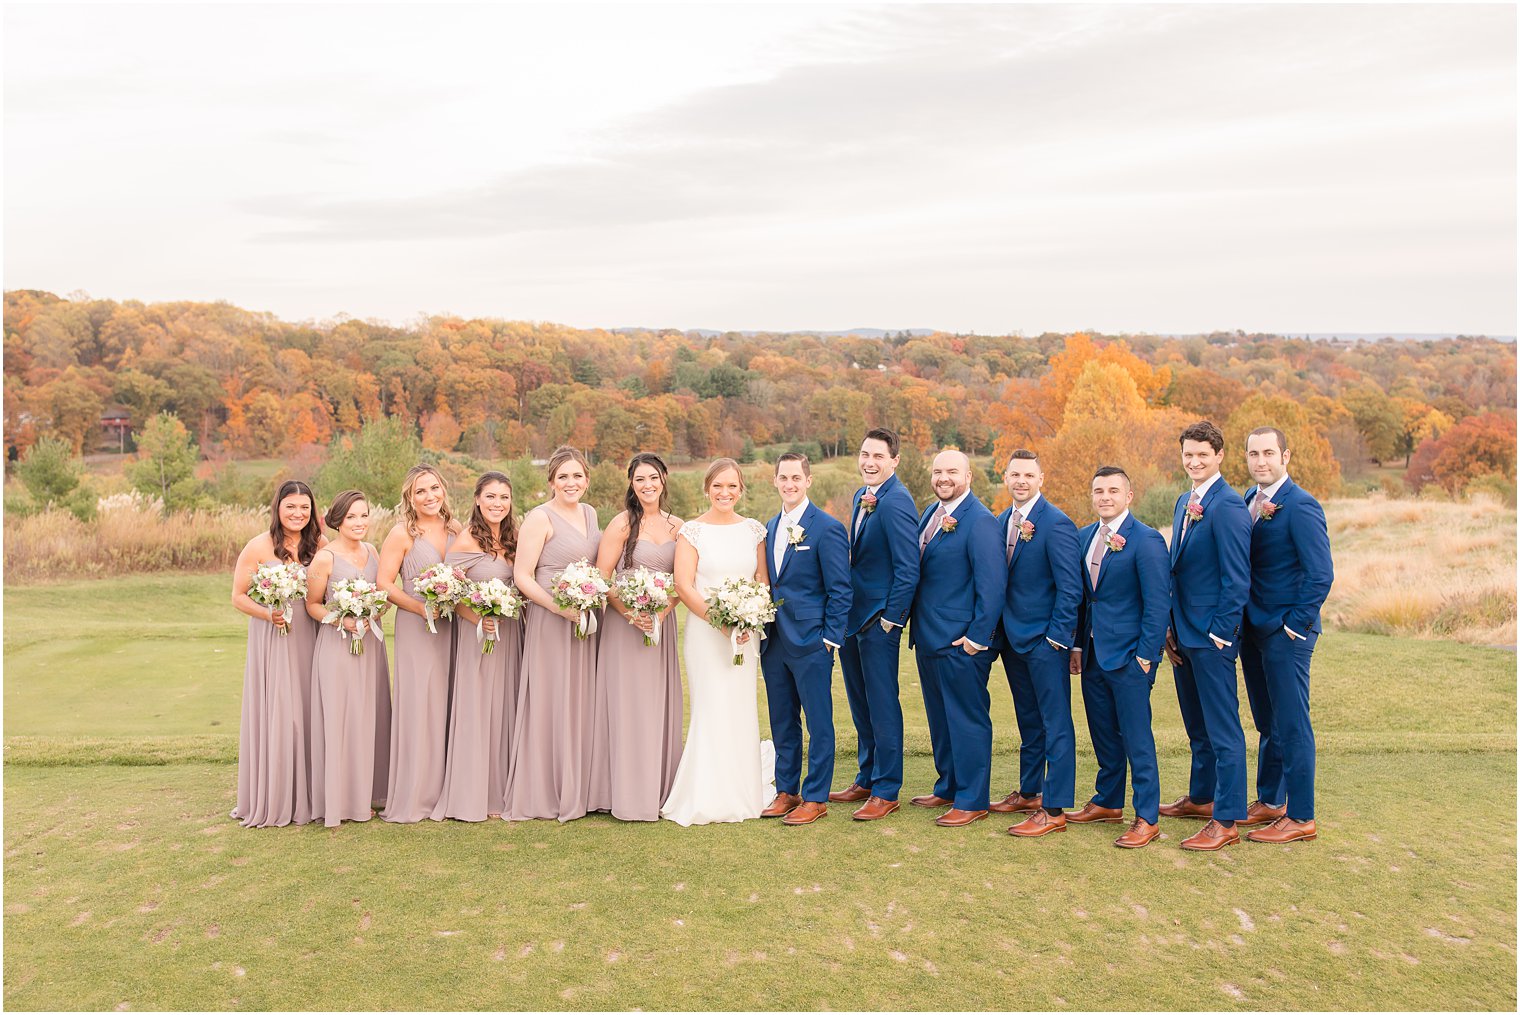 Wedding Party at New York Country Club with fall foliage